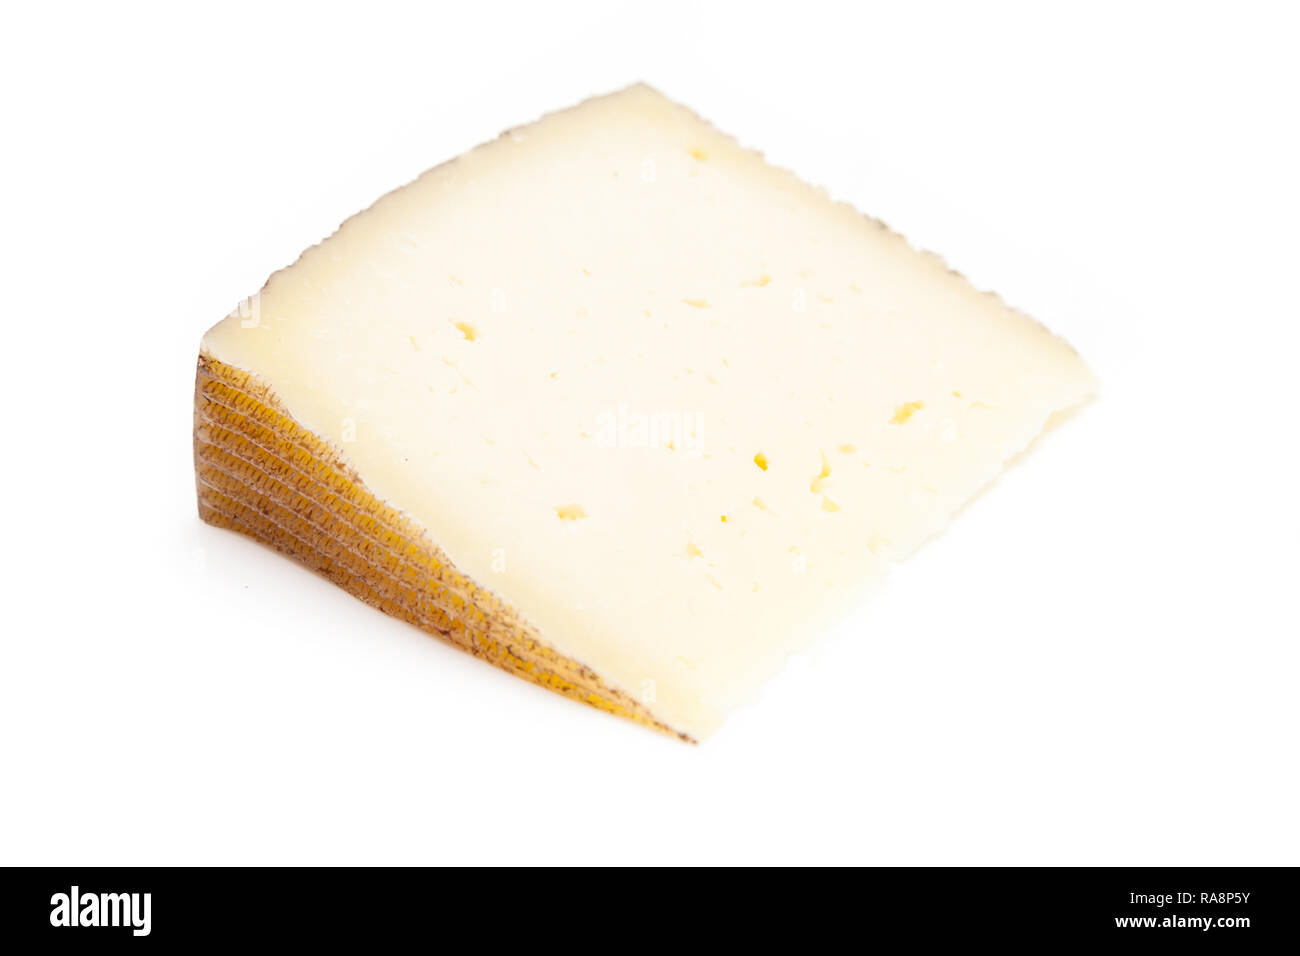 Spanish Manchego cheese made from sheep's milk it has a firm and creamy texture, isolated on a white studio background. Stock Photo